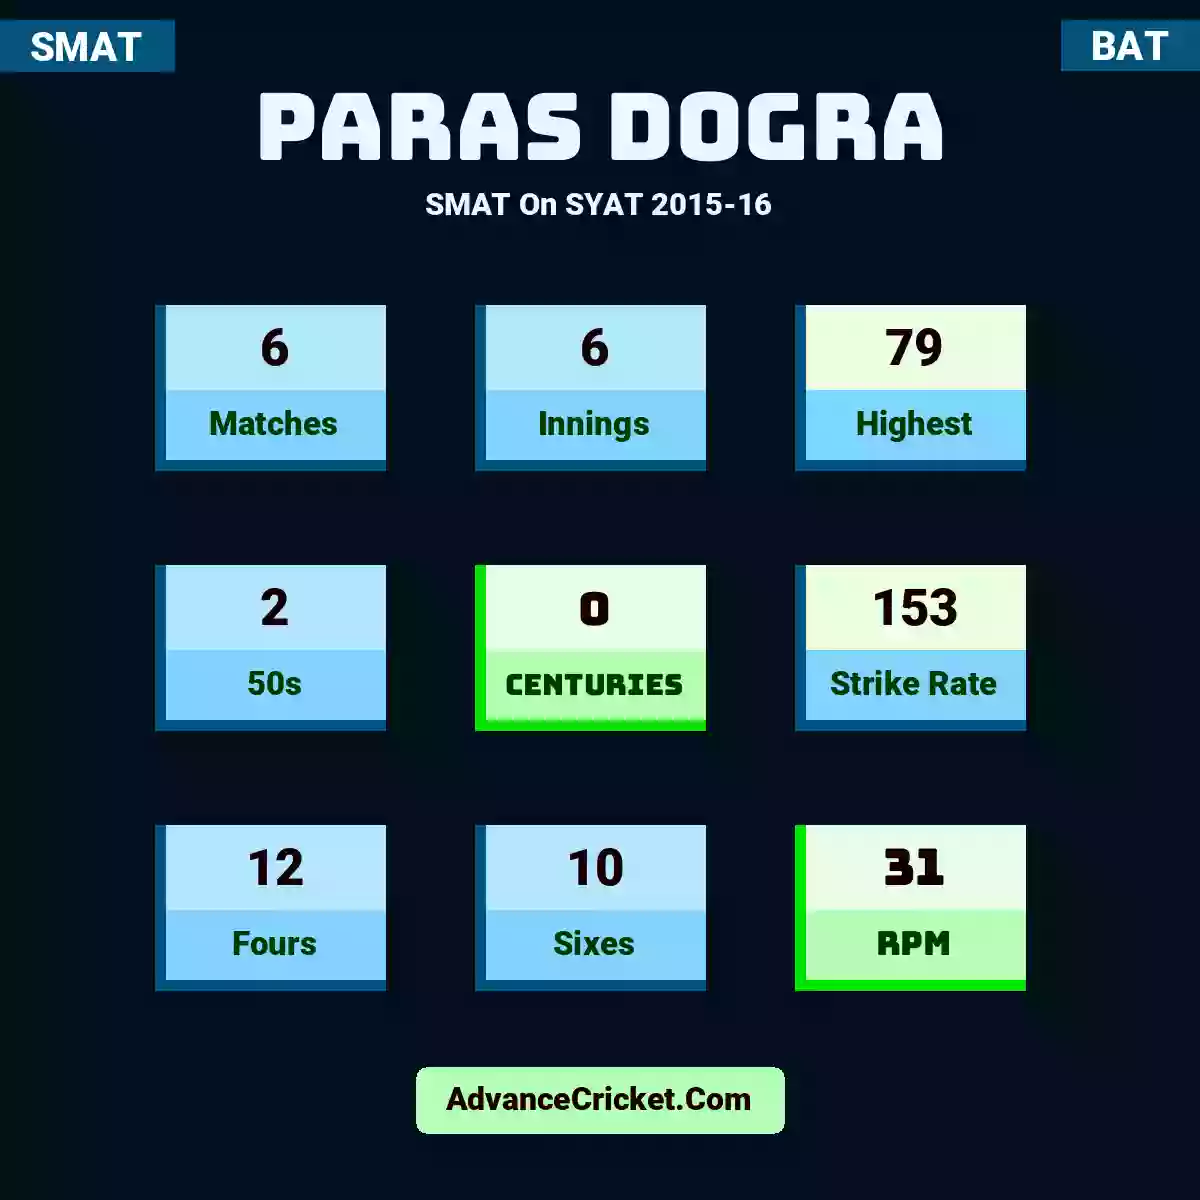 Paras Dogra SMAT  On SYAT 2015-16, Paras Dogra played 6 matches, scored 79 runs as highest, 2 half-centuries, and 0 centuries, with a strike rate of 153. P.Dogra hit 12 fours and 10 sixes, with an RPM of 31.